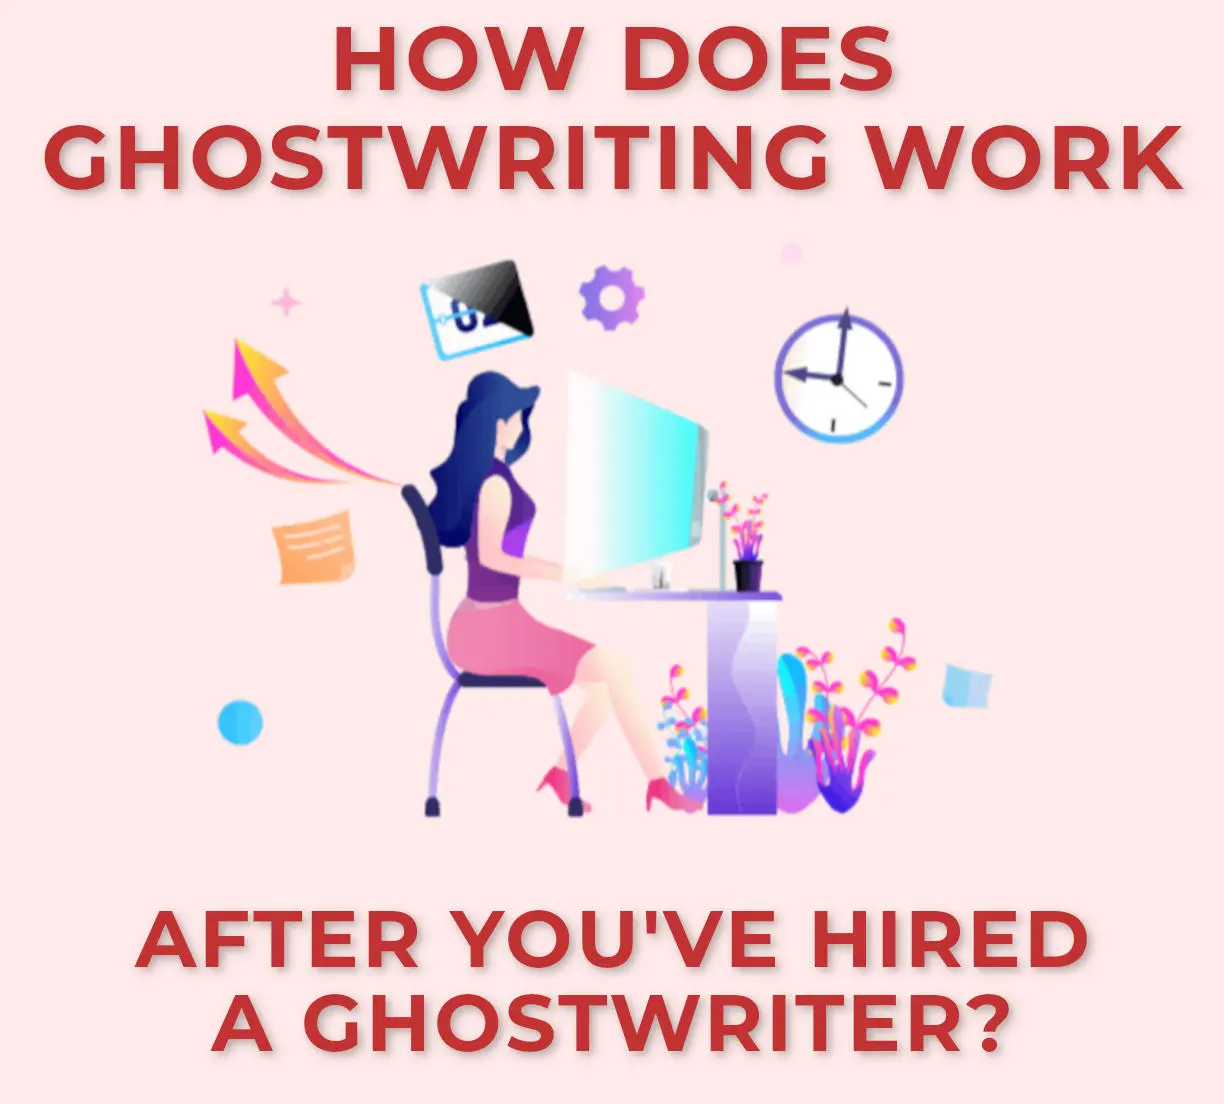 How-Does-Ghostwriting-Work-After-Youve-Hired-A-Ghostwriter-Blog-Header